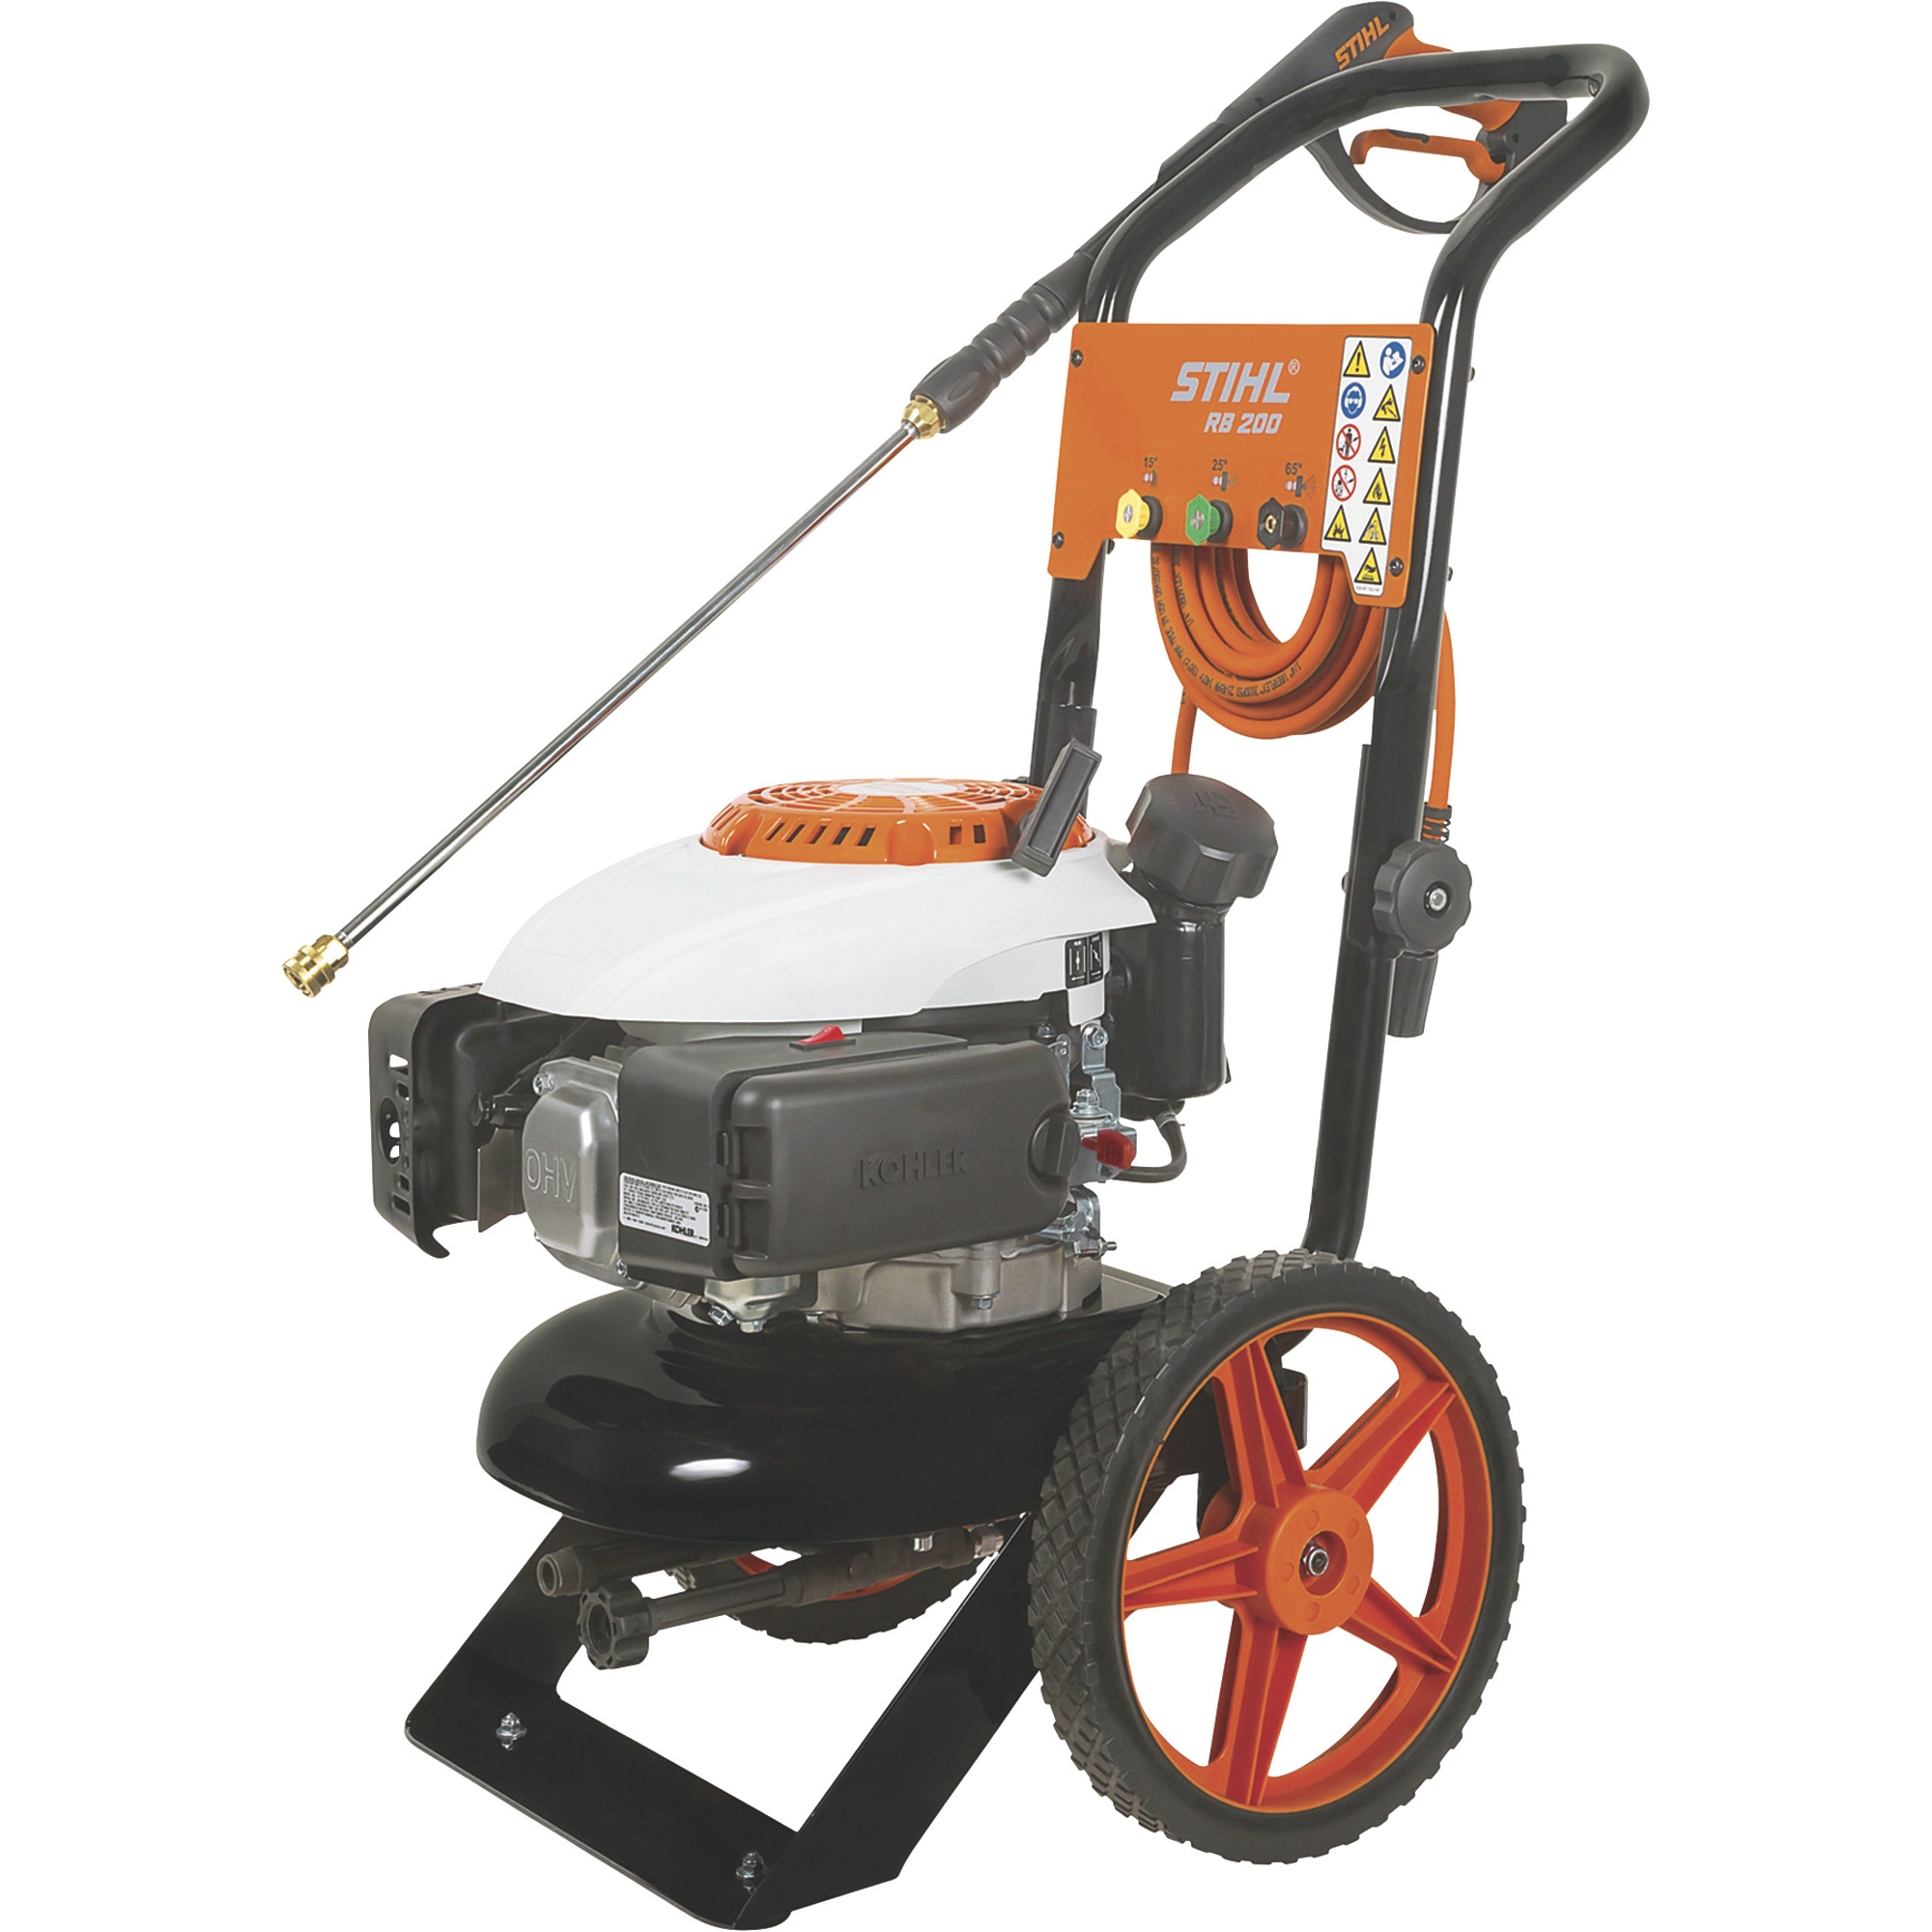 Stihl Gas- Powered Cold Water Pressure Washer â 2500 PSI, 2.3 GPM, Kohler Engine, Model RB 200